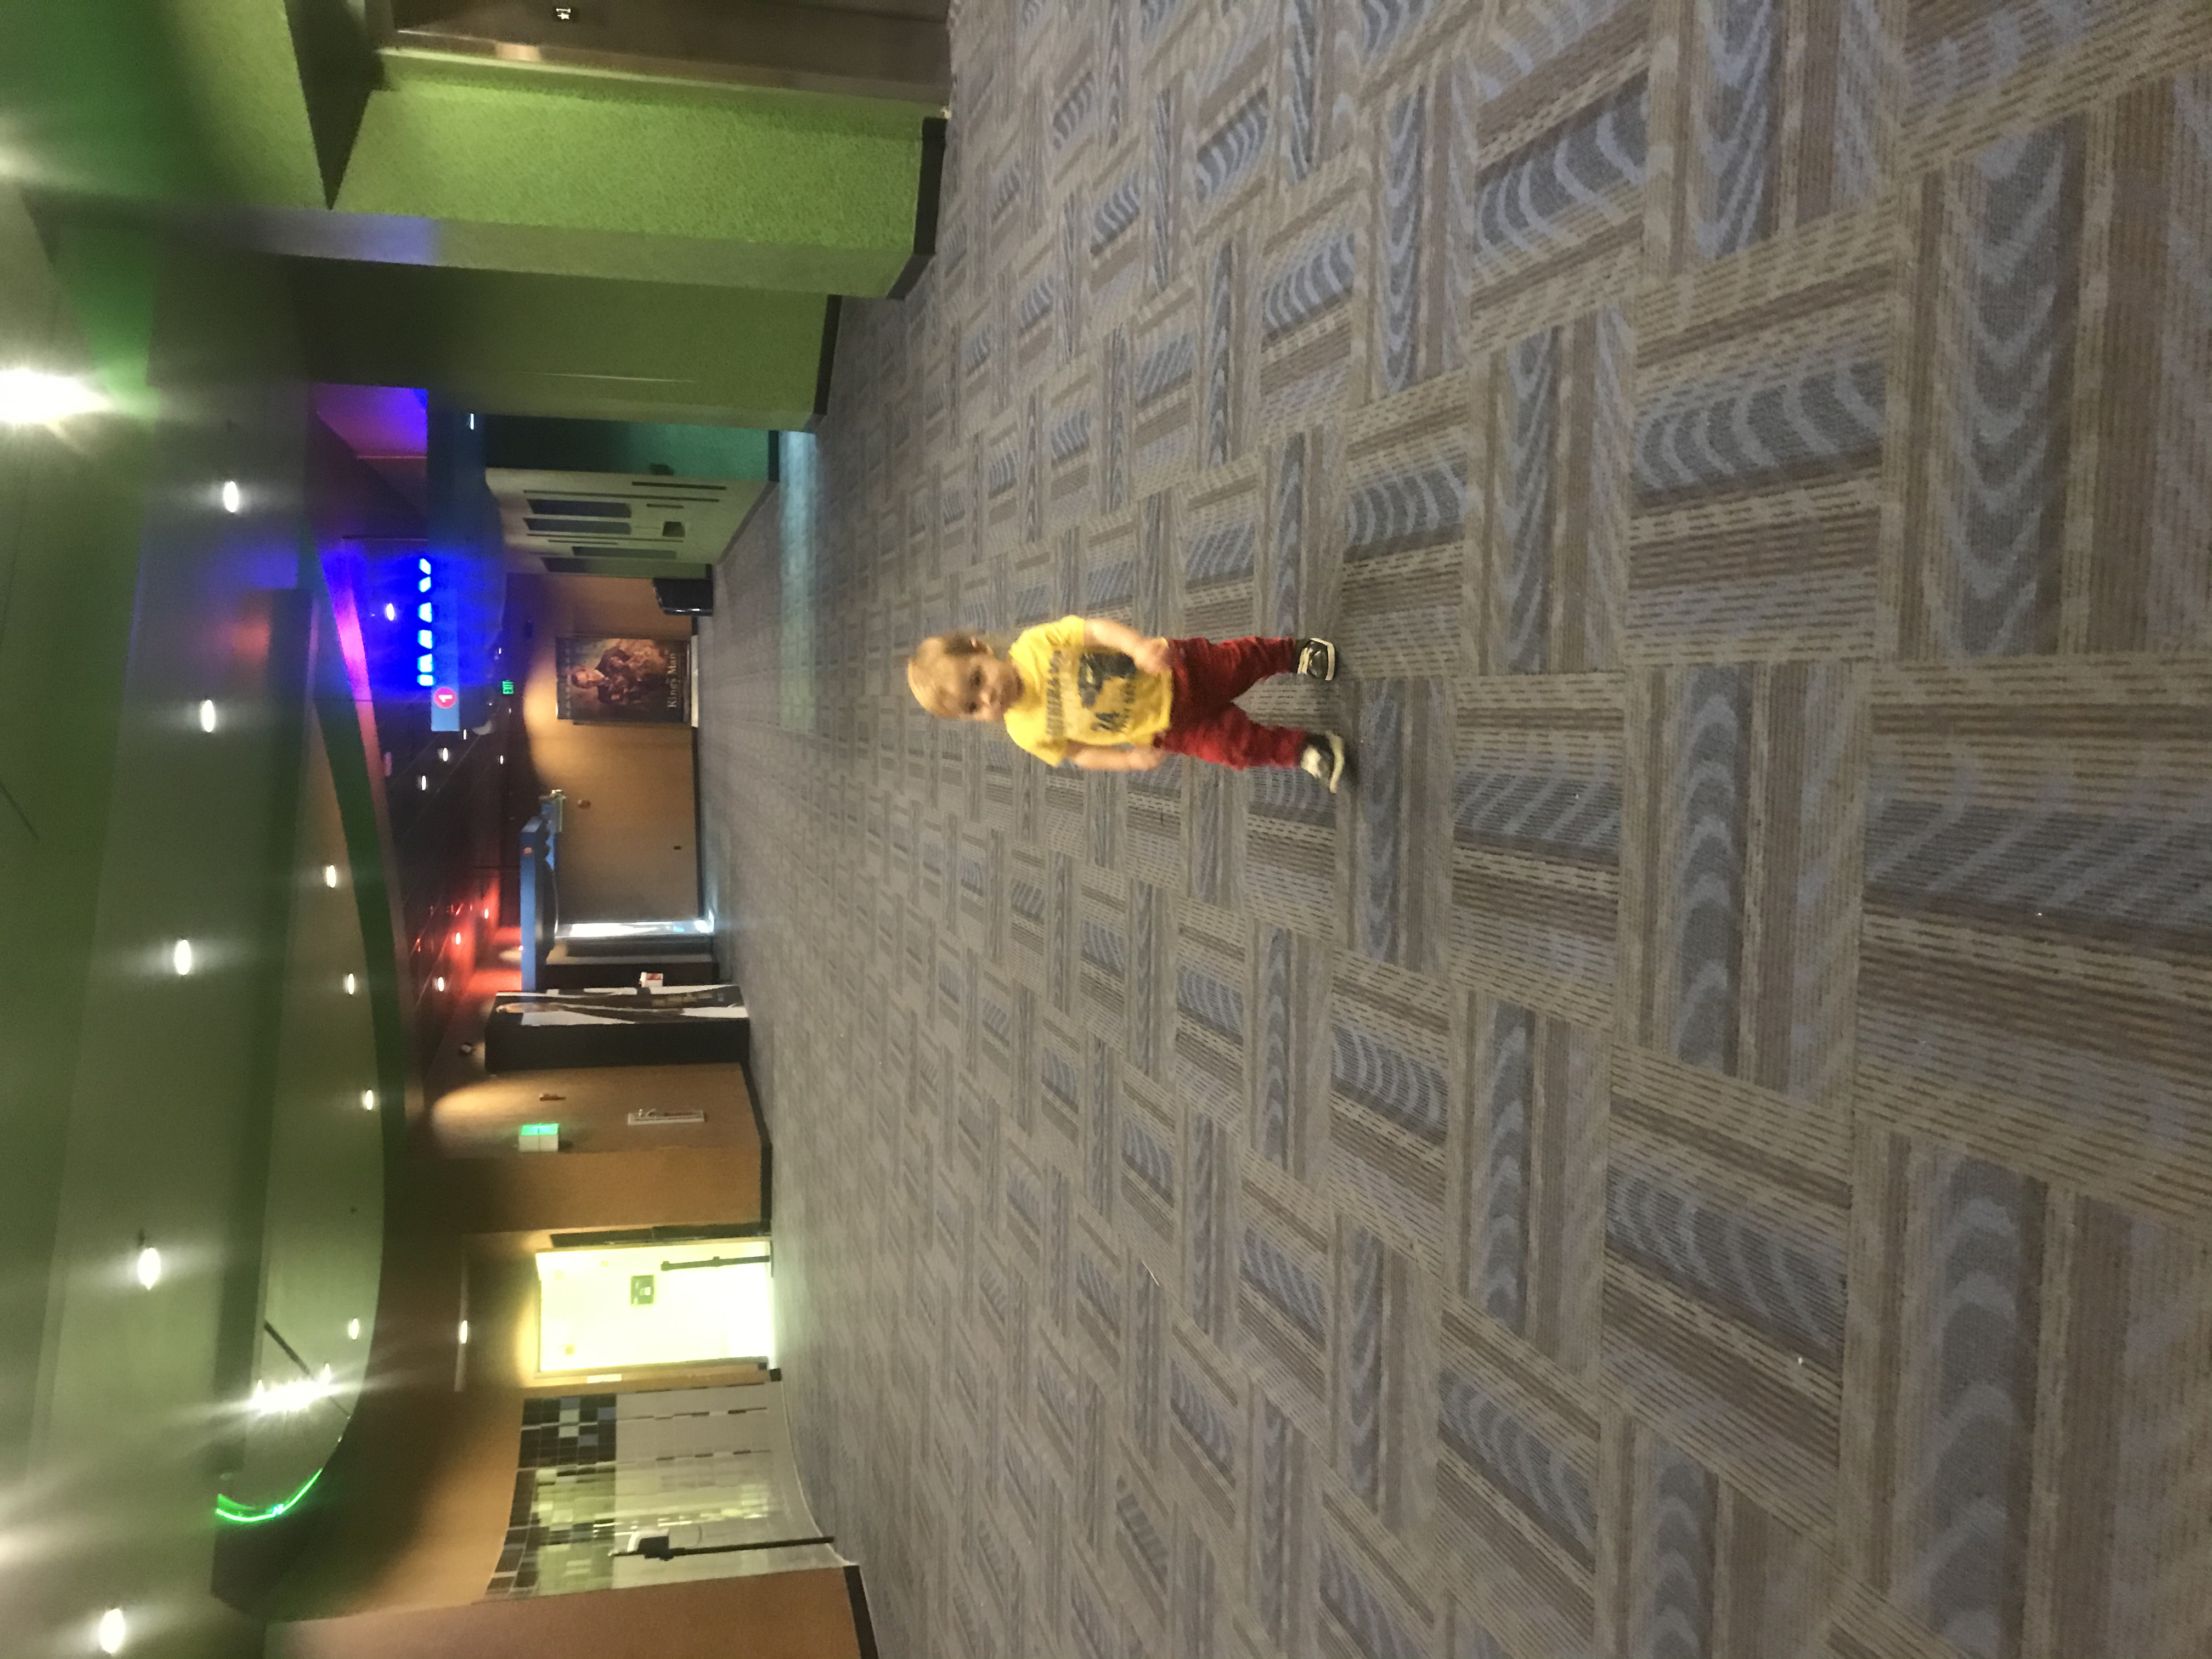 Leo at the Movies